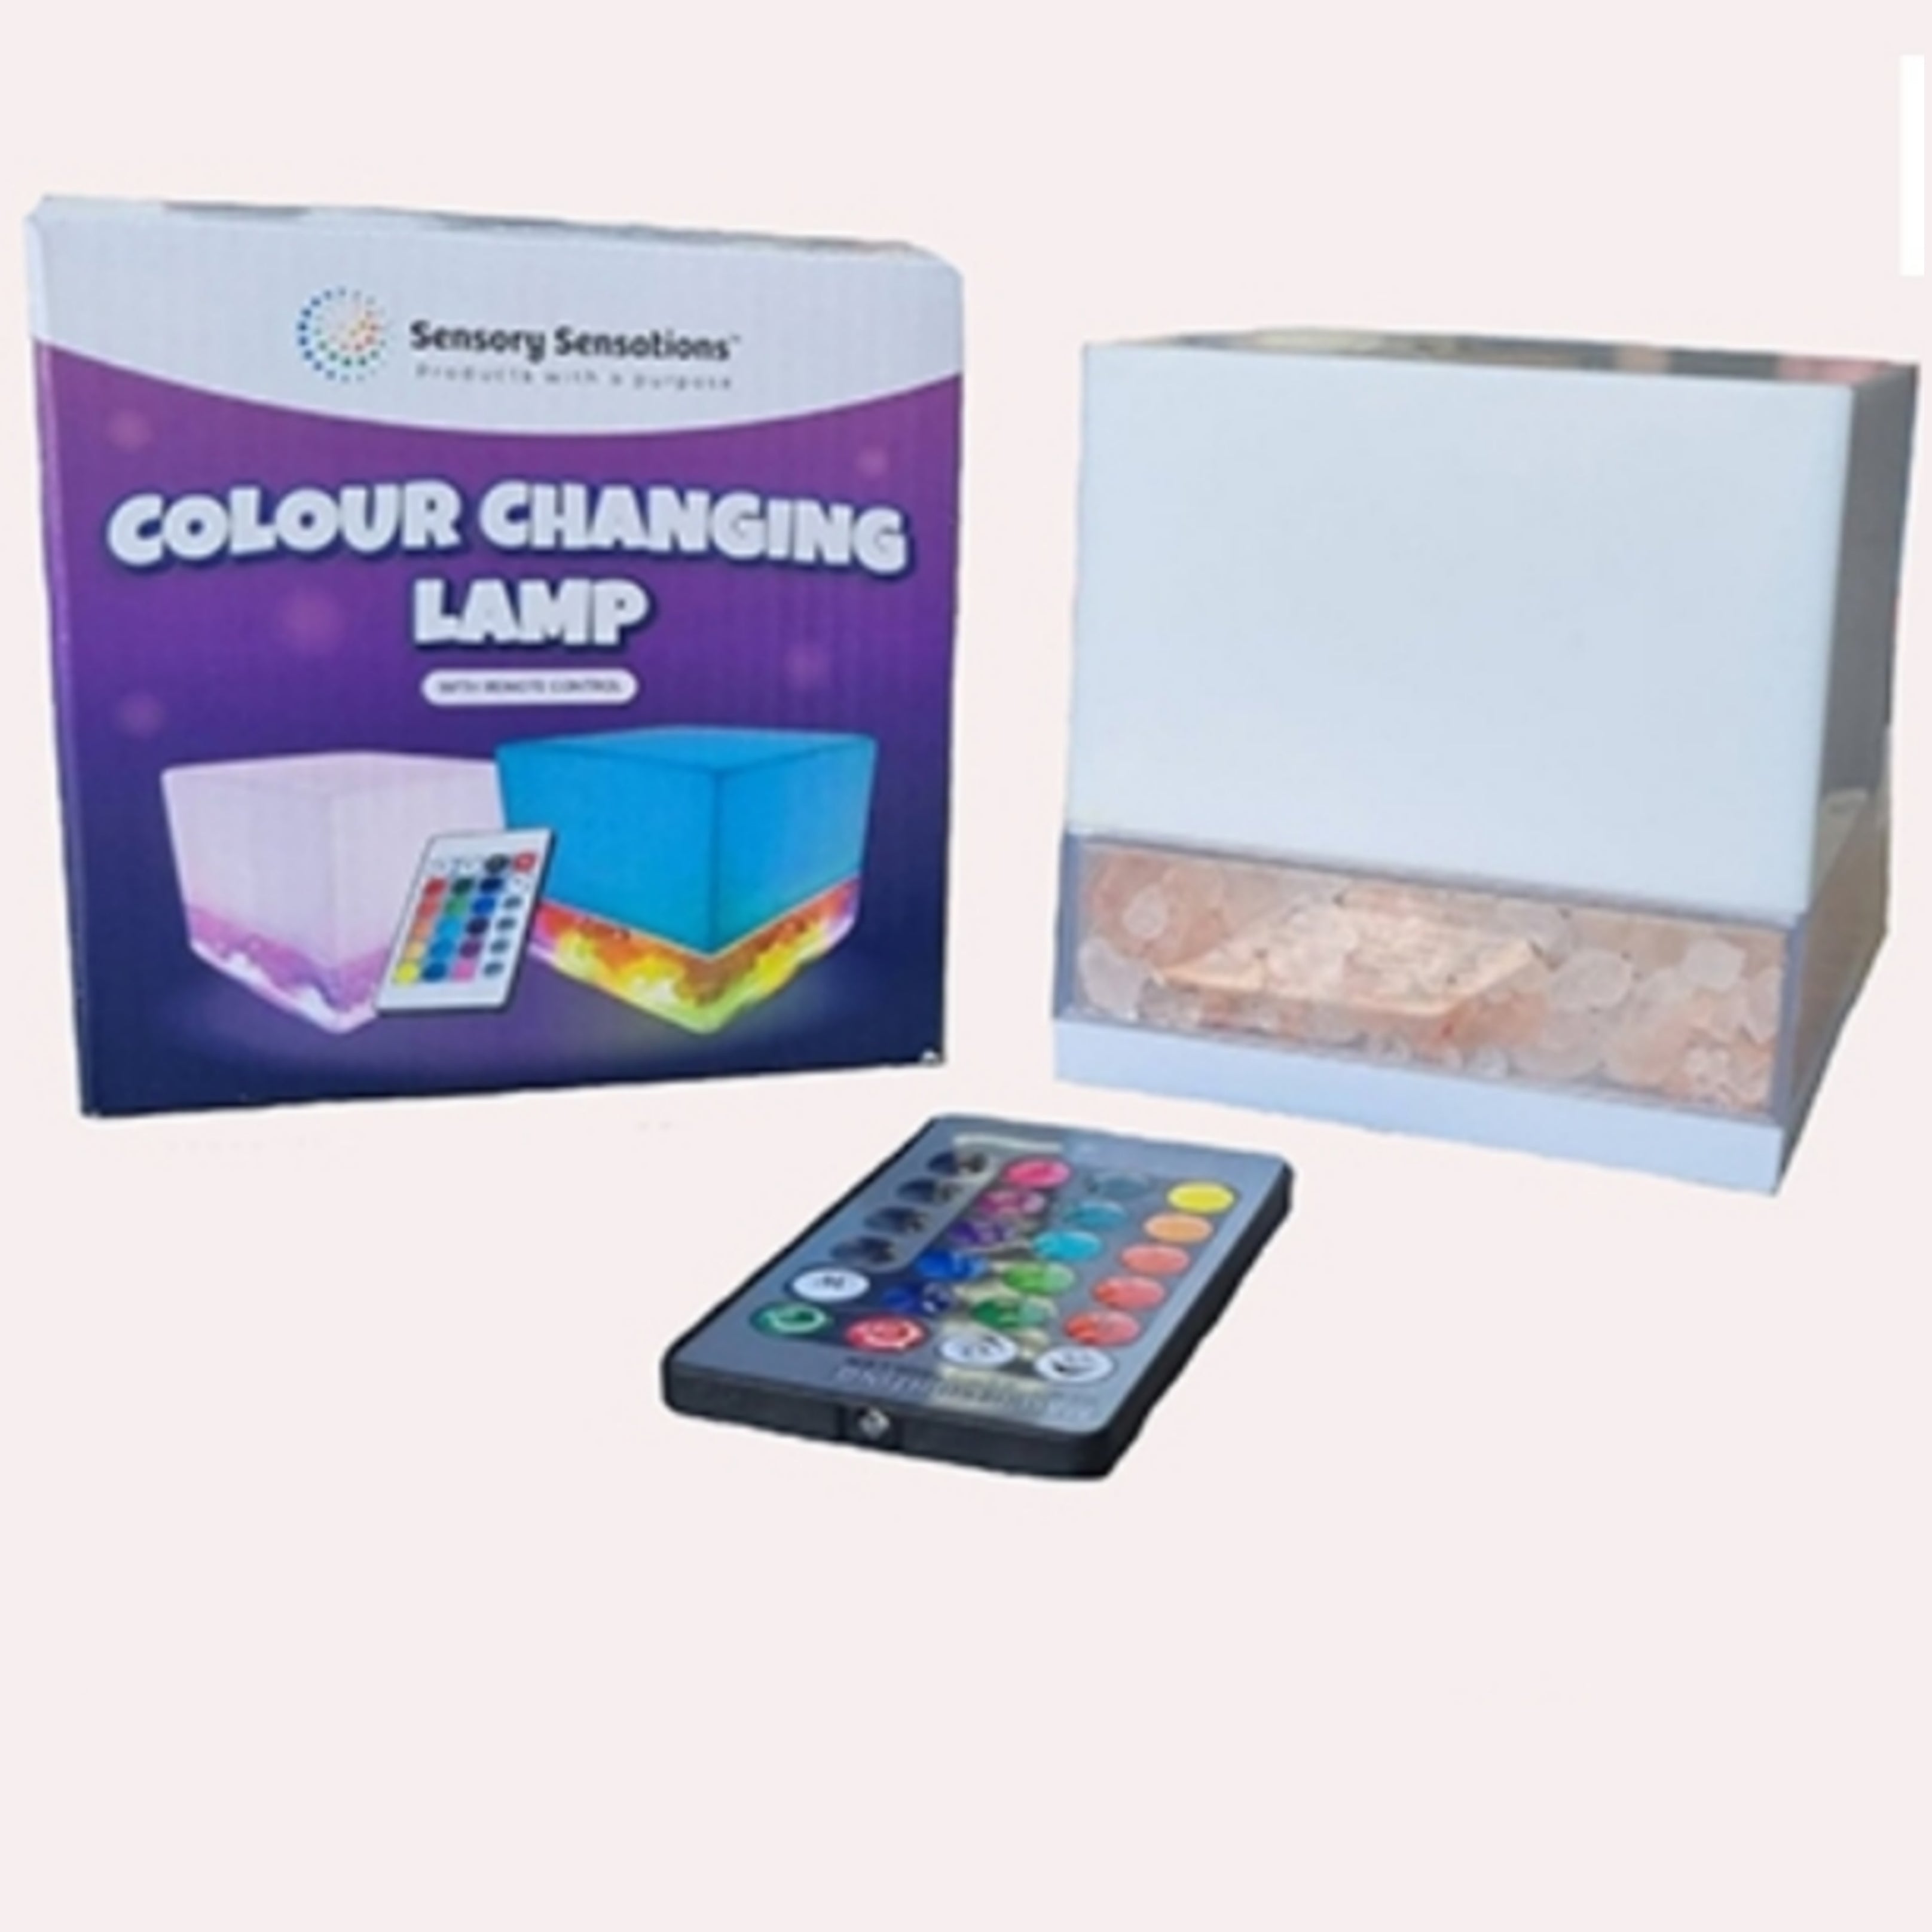 LED colour changing Lamp